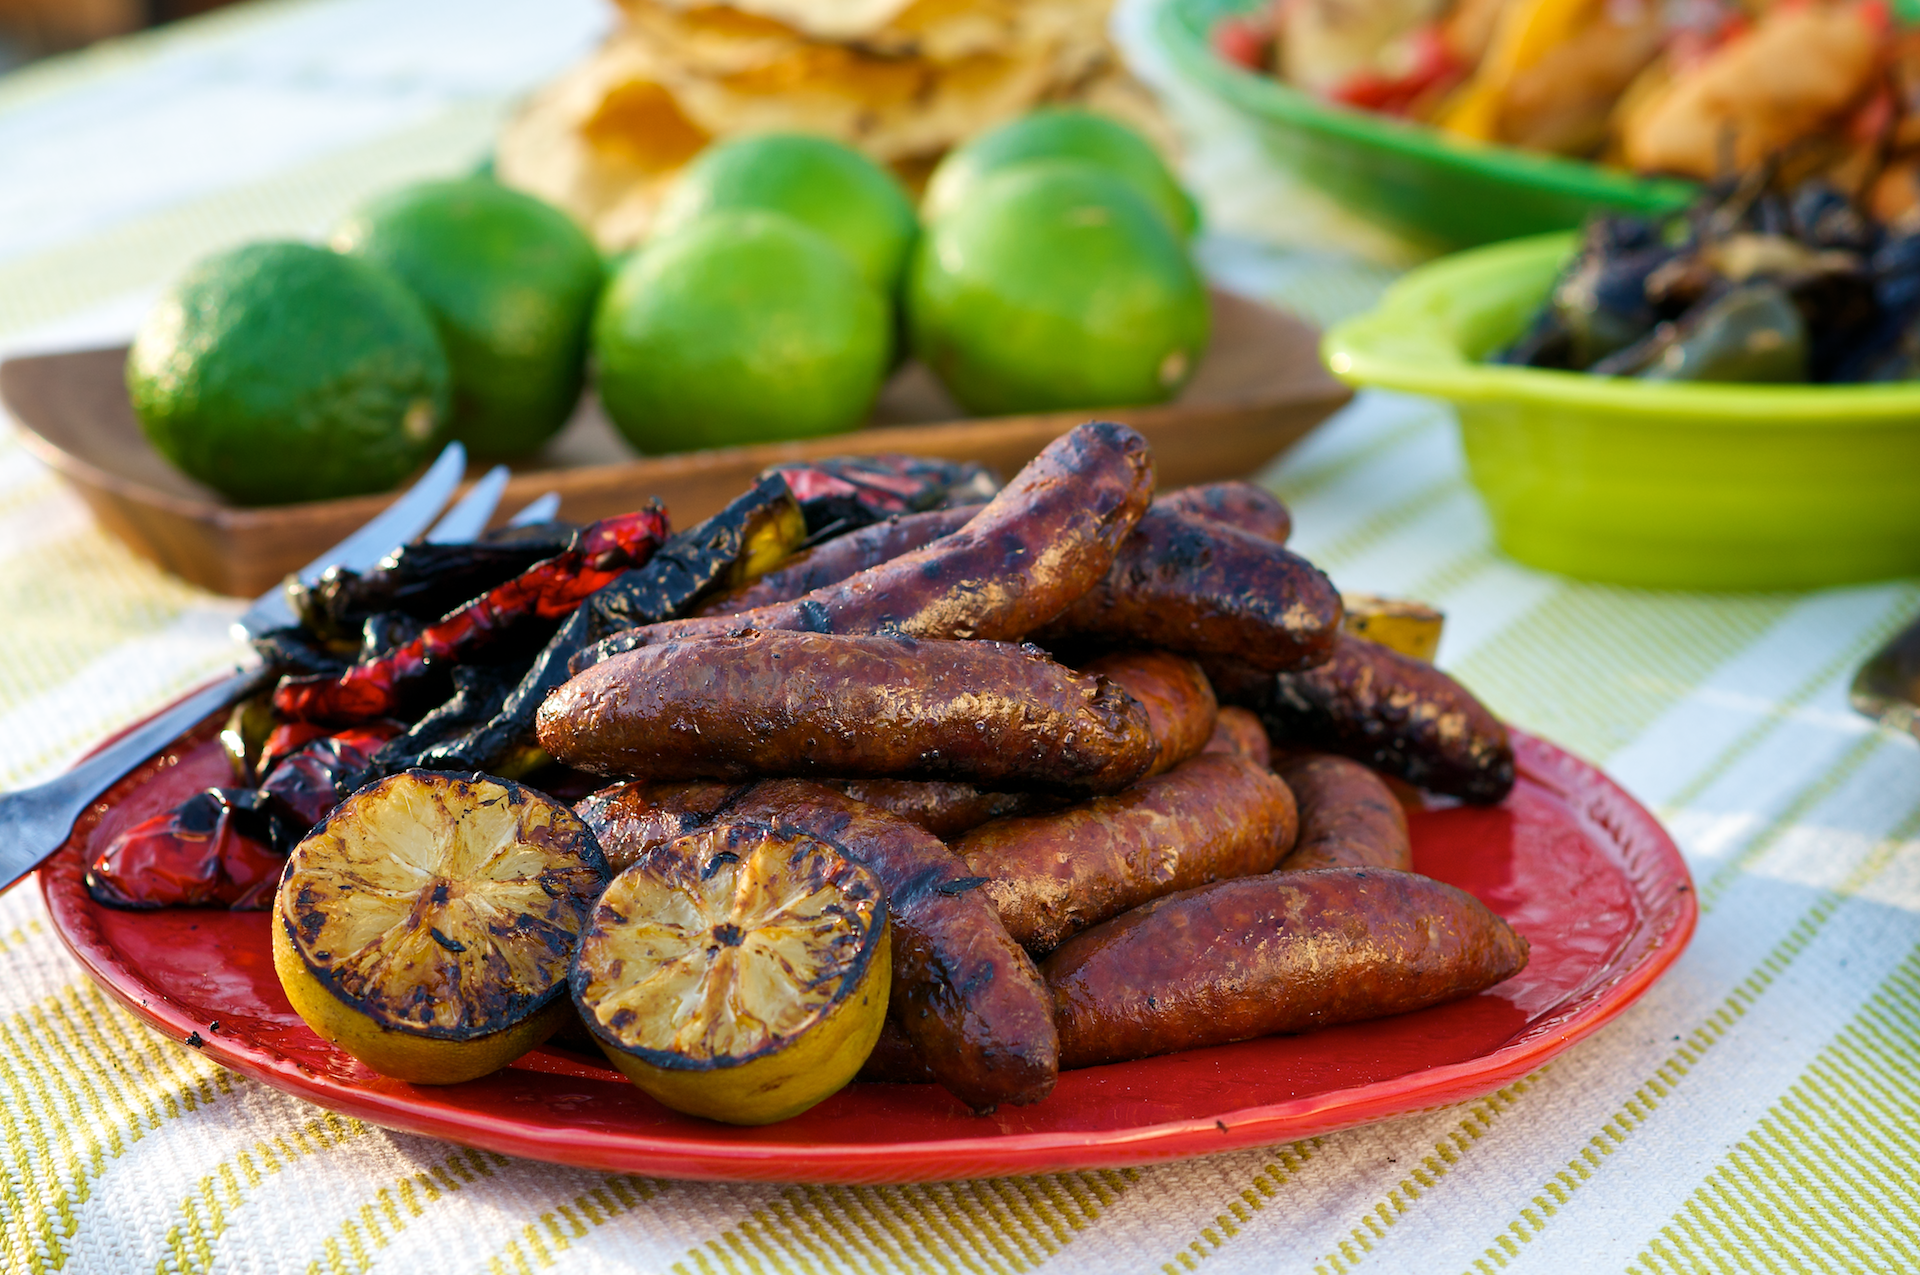 Marinating the chorizo in a dark Mexican beer renders the meat more delicate and adds a great malty flavor. Add it to any entree or eat it alone - so delicious!